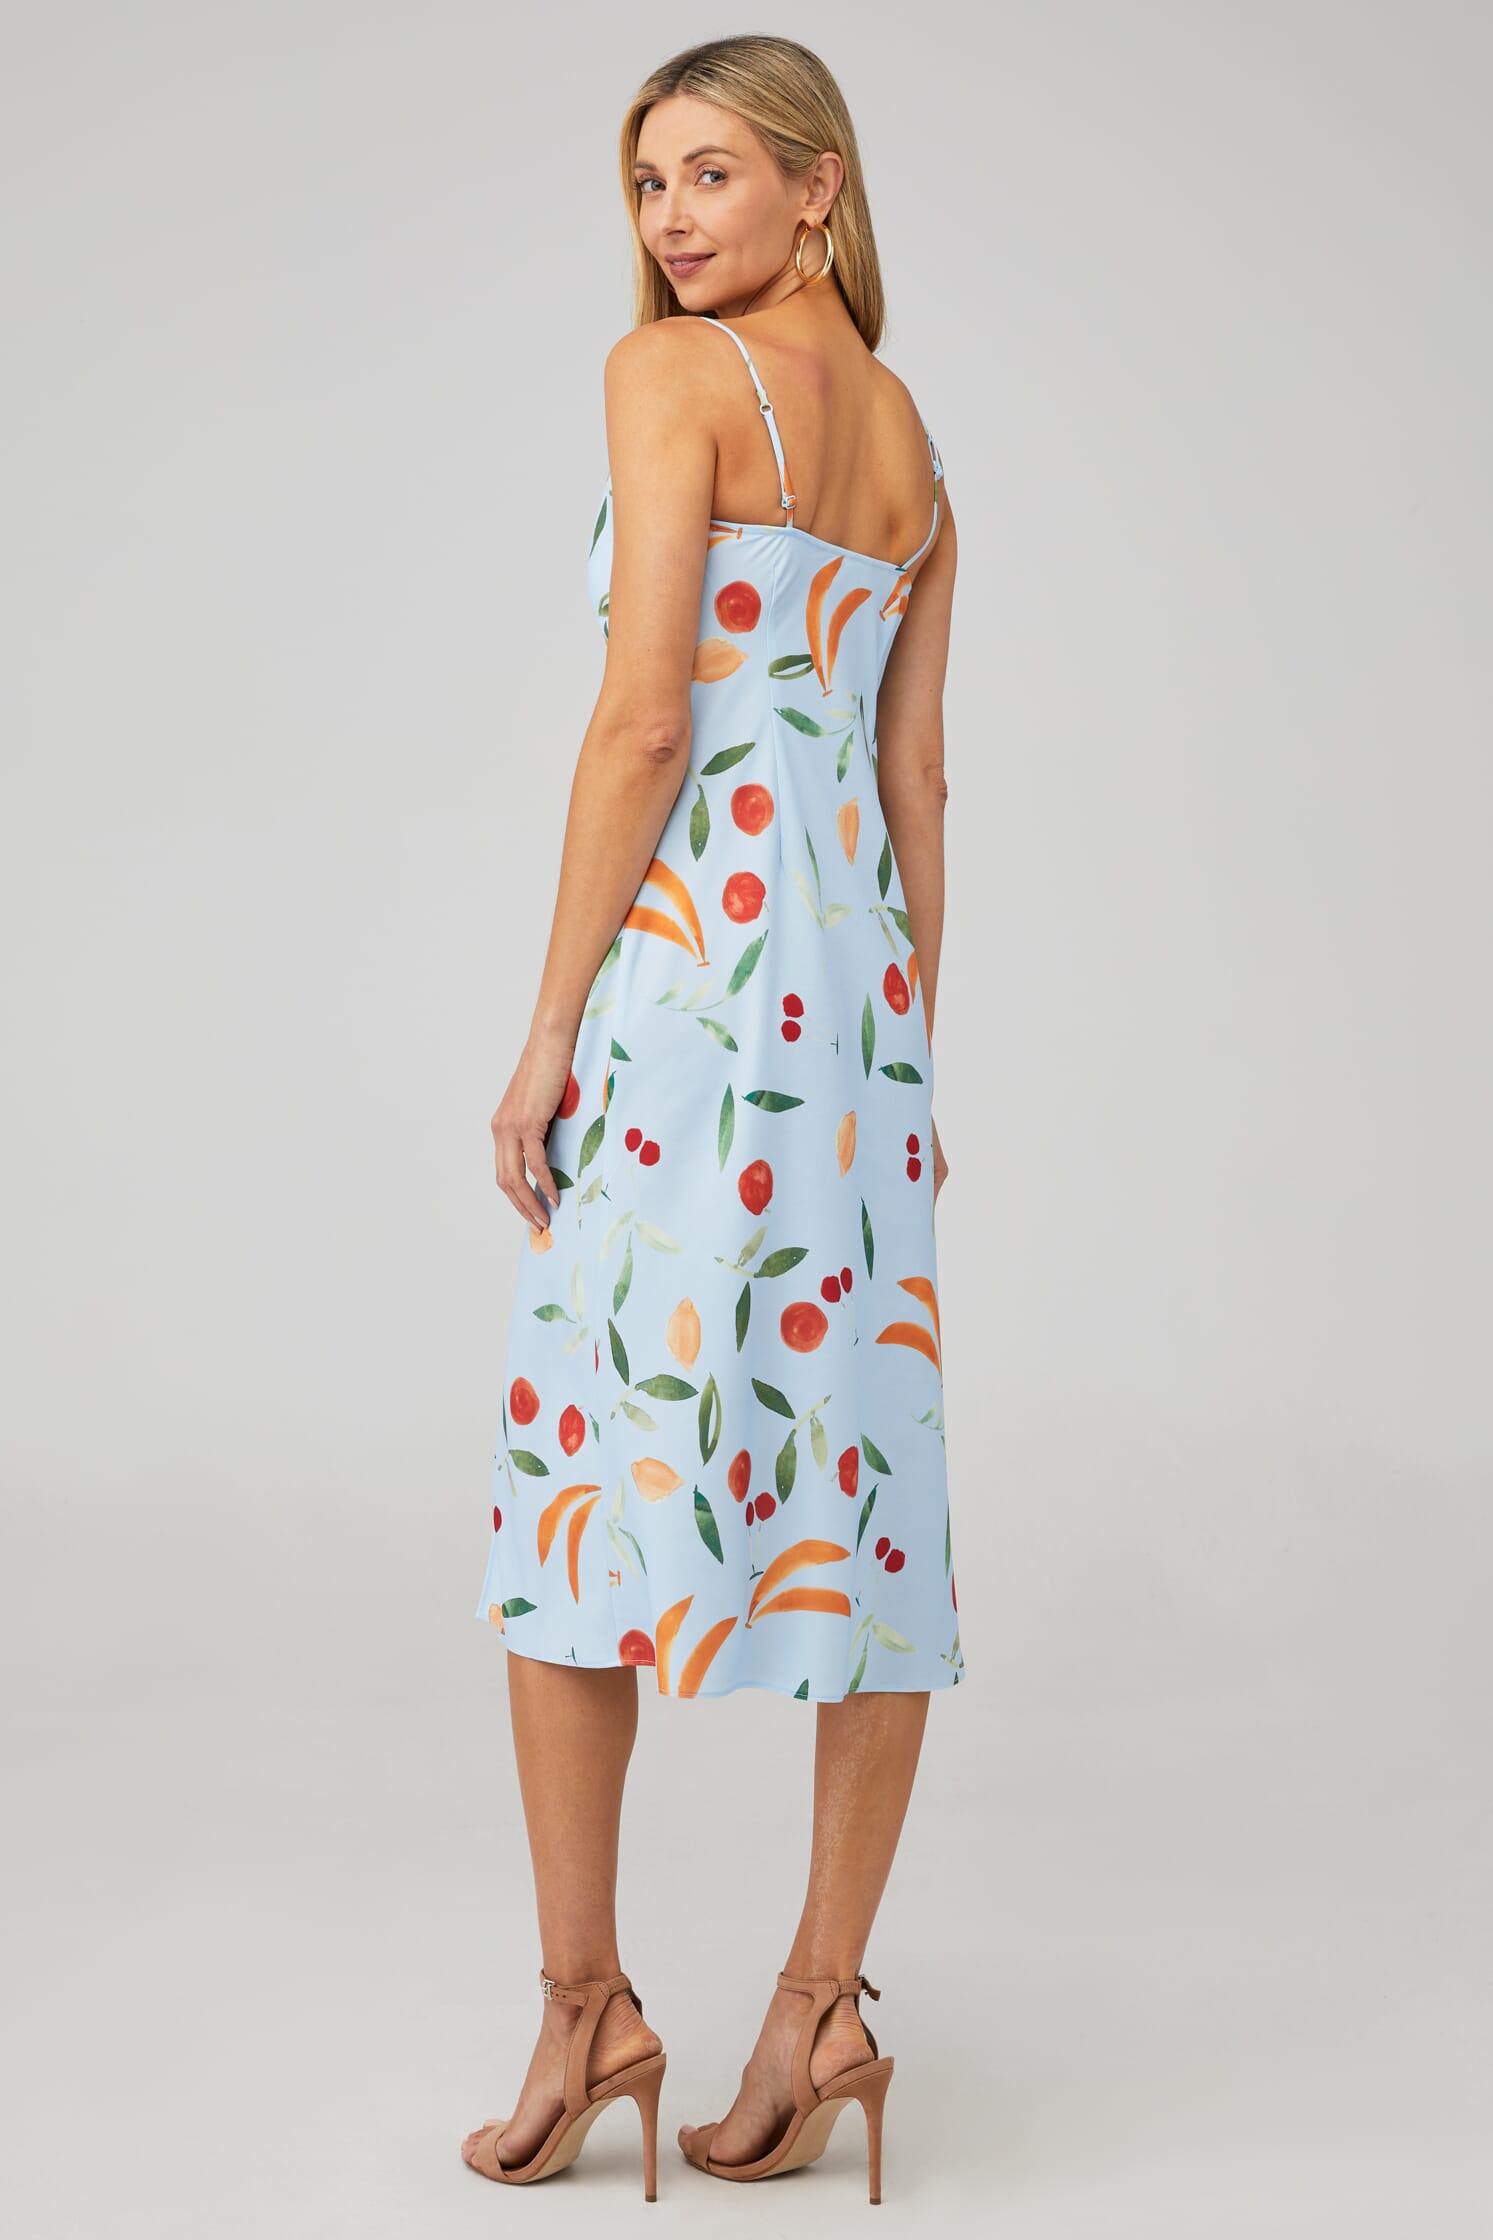 Finders Keepers Calypso Midi Dress in Blue Fruitbowl